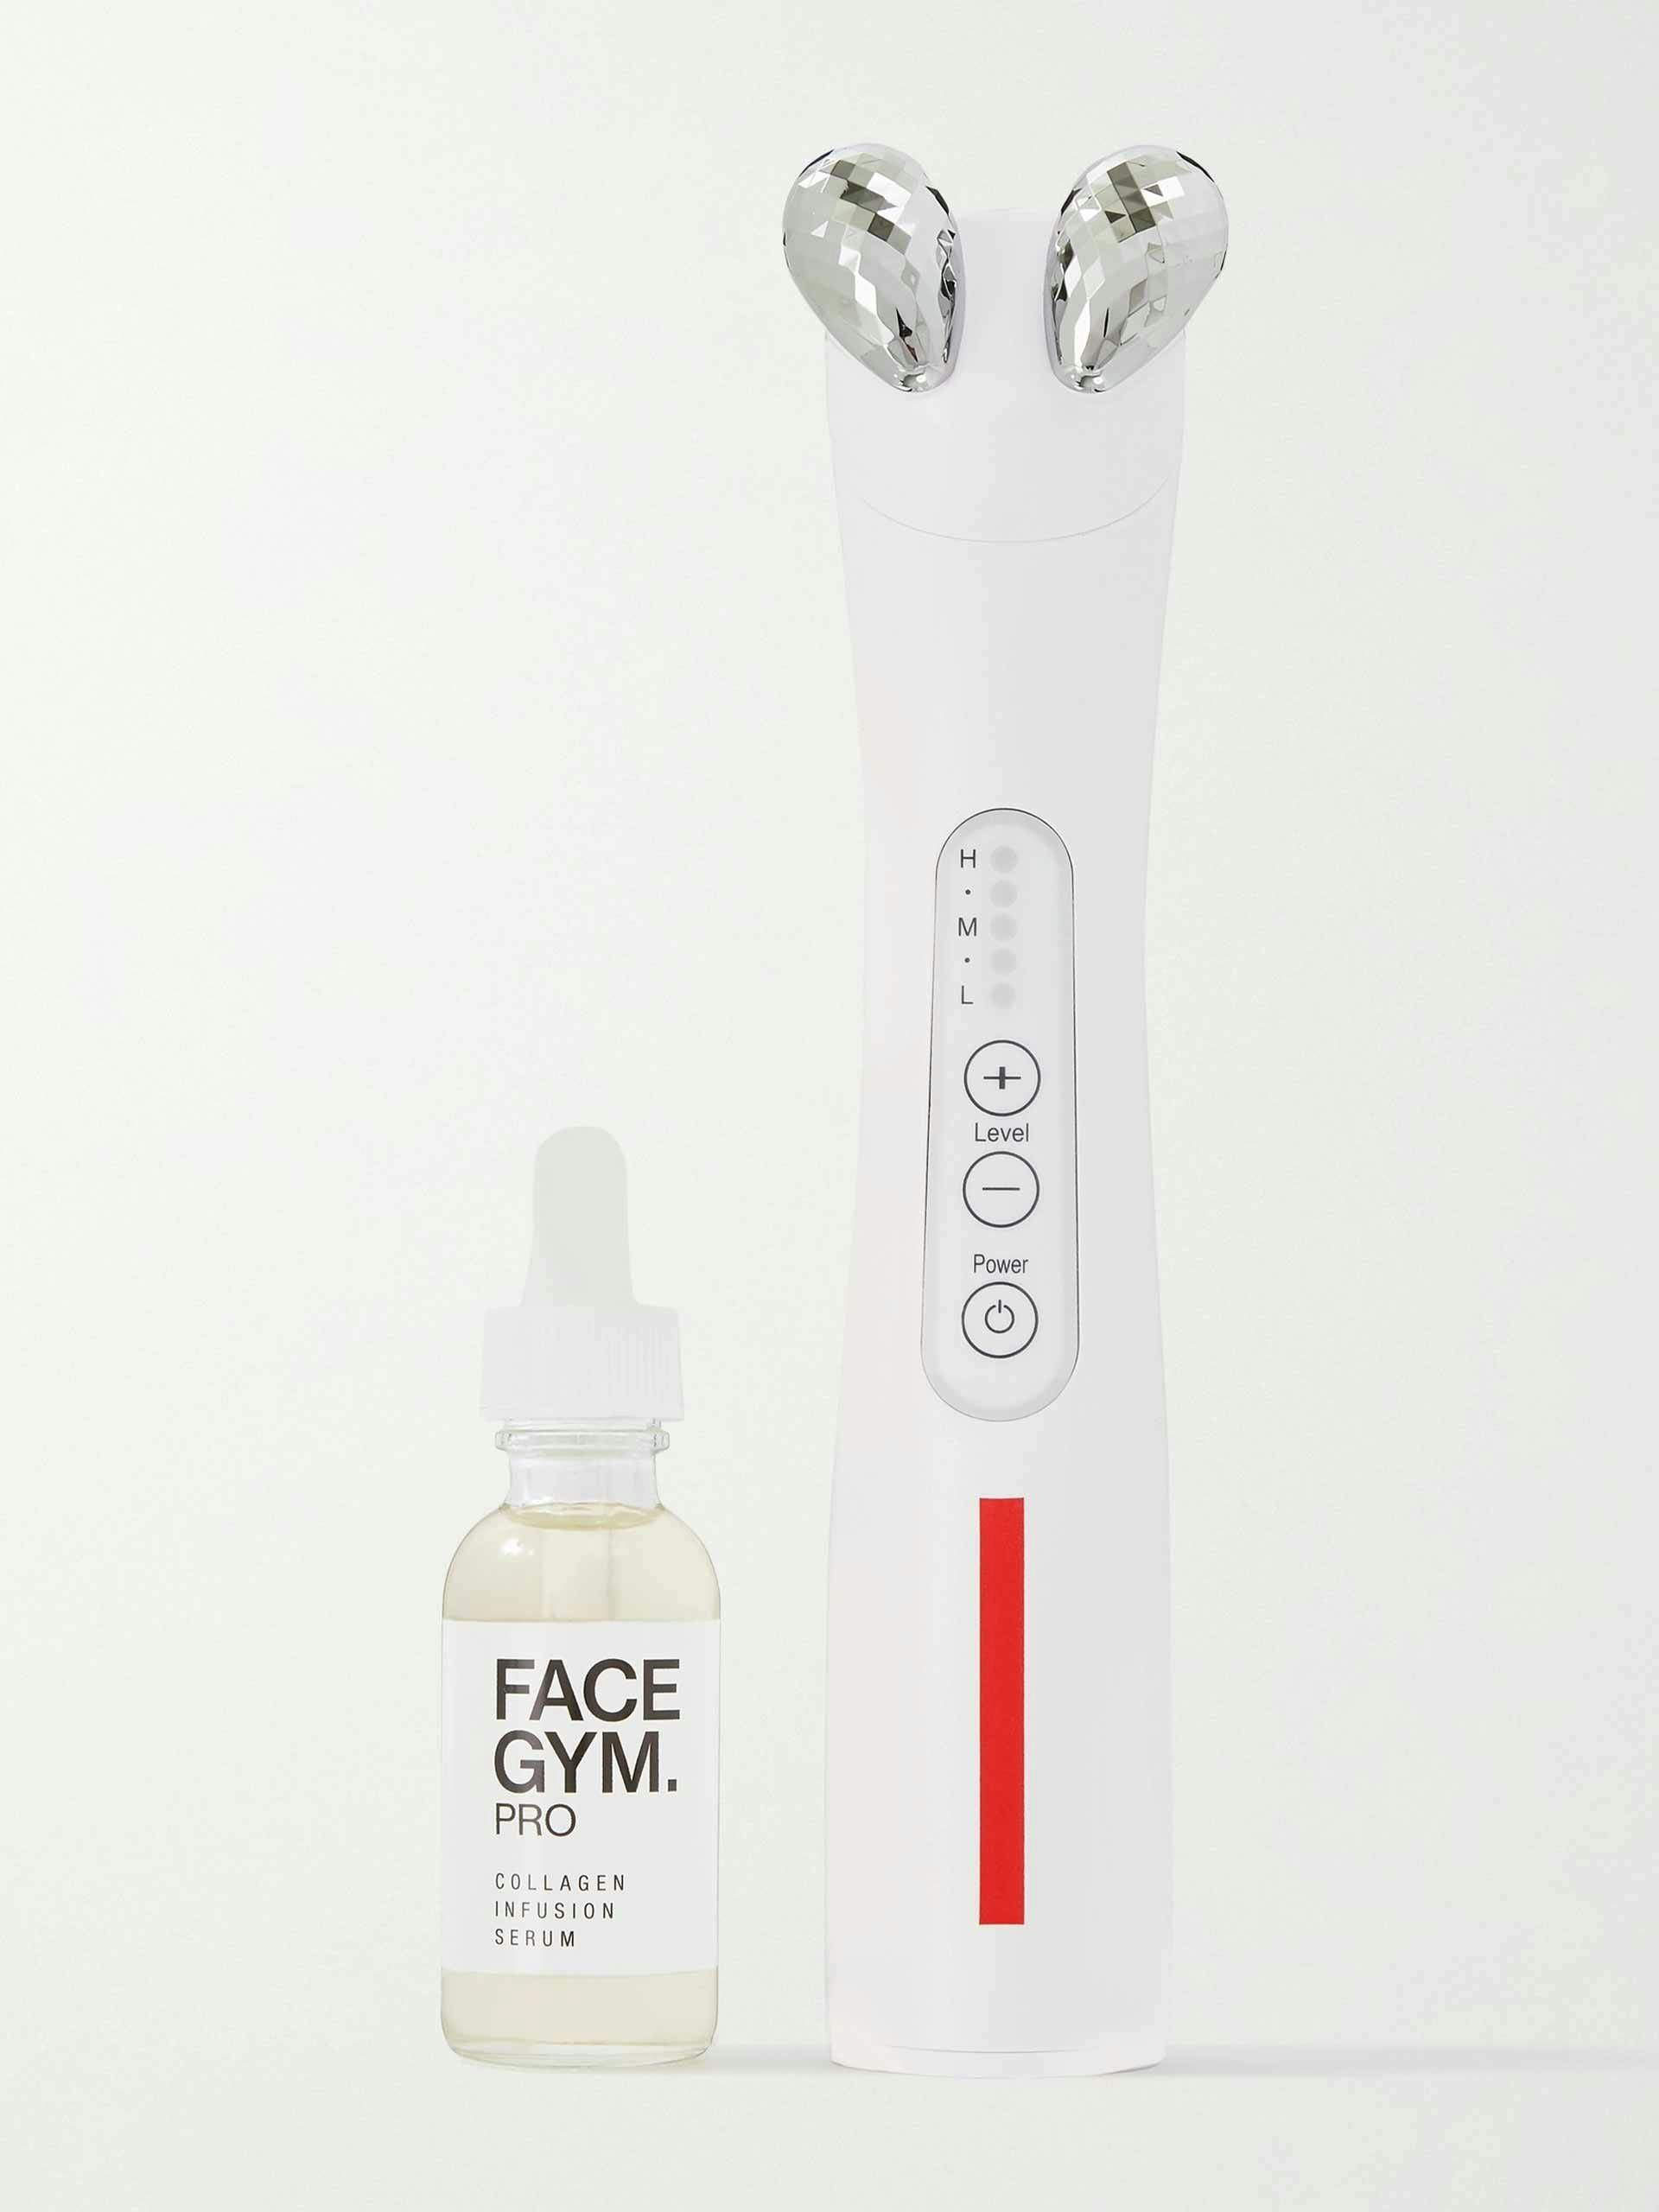 Facial sculpting tool and collagen infusion serum